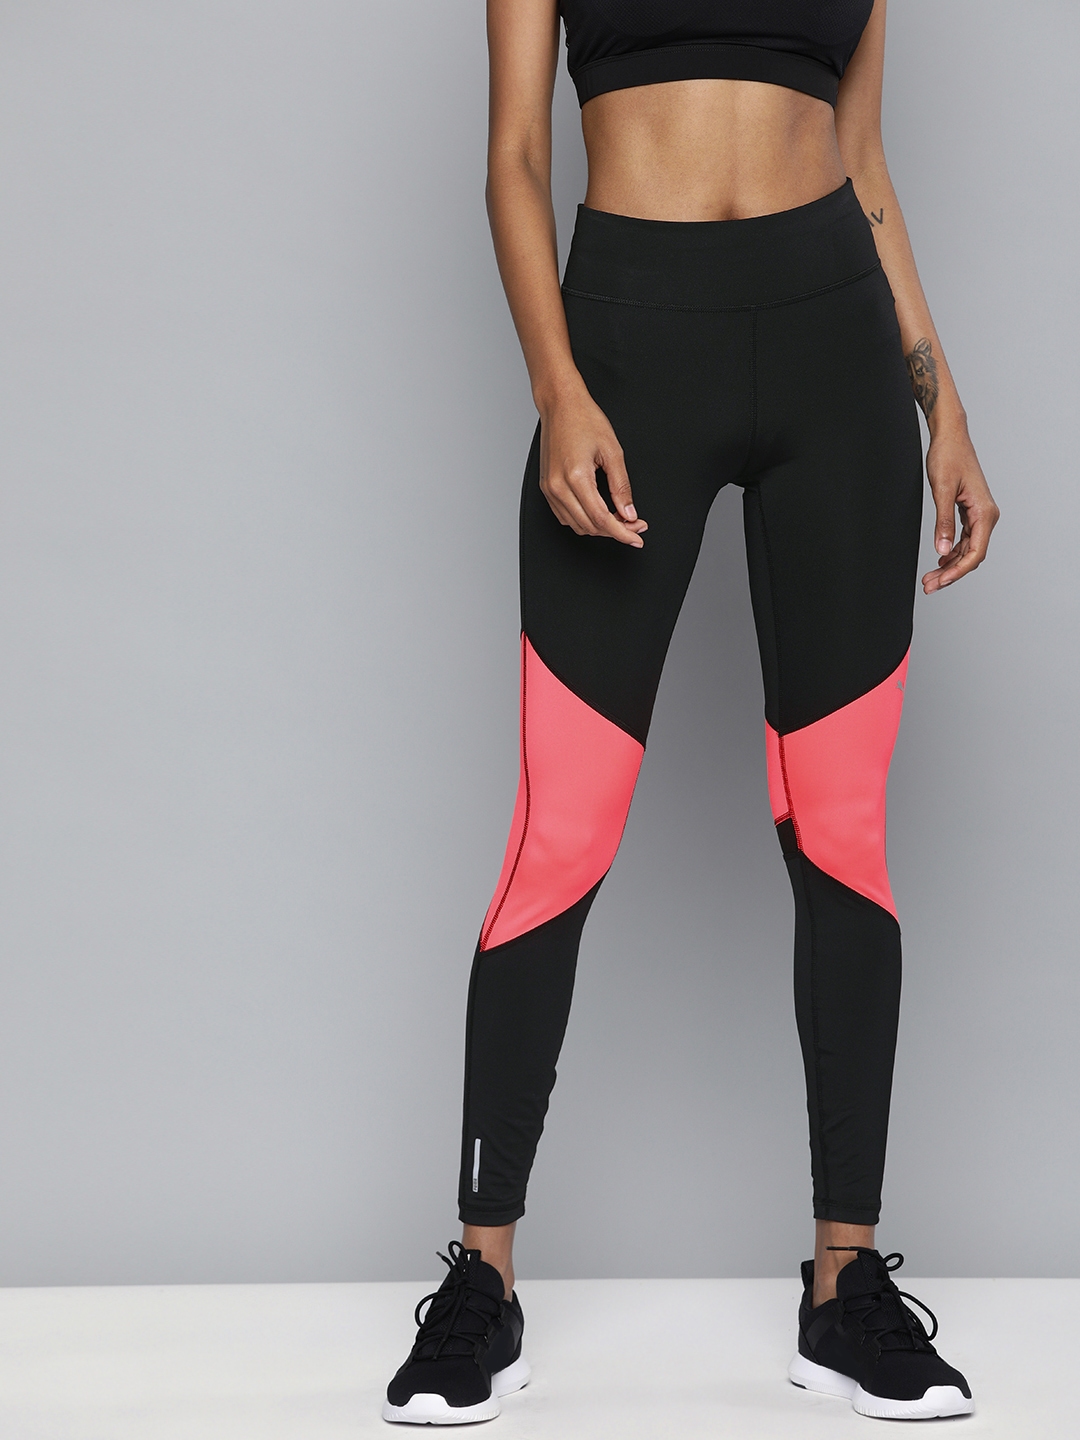 Buy Puma Women Black And Pink Colorblocked Ignite Dry Cell